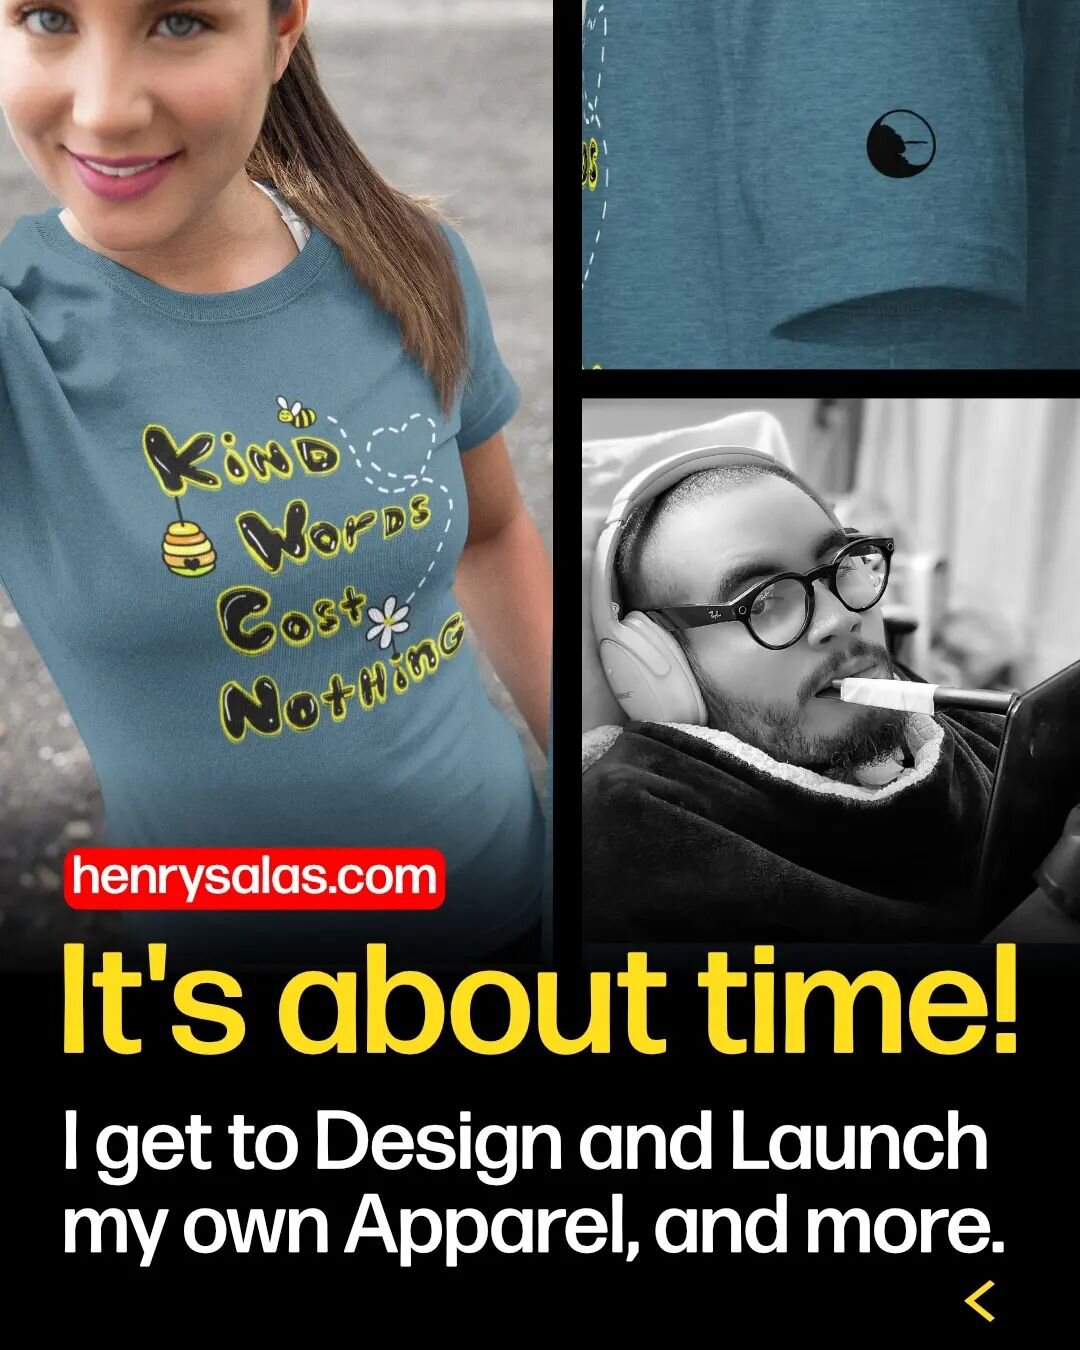 🗣️ I Think It's Time. What do think? At henrysalas.com I will be expanding my catalogue, meanwhile, giving information about how I got disabled, and more and would be very helpful to get your feedback. But firstly reaching the goal on going home! Al